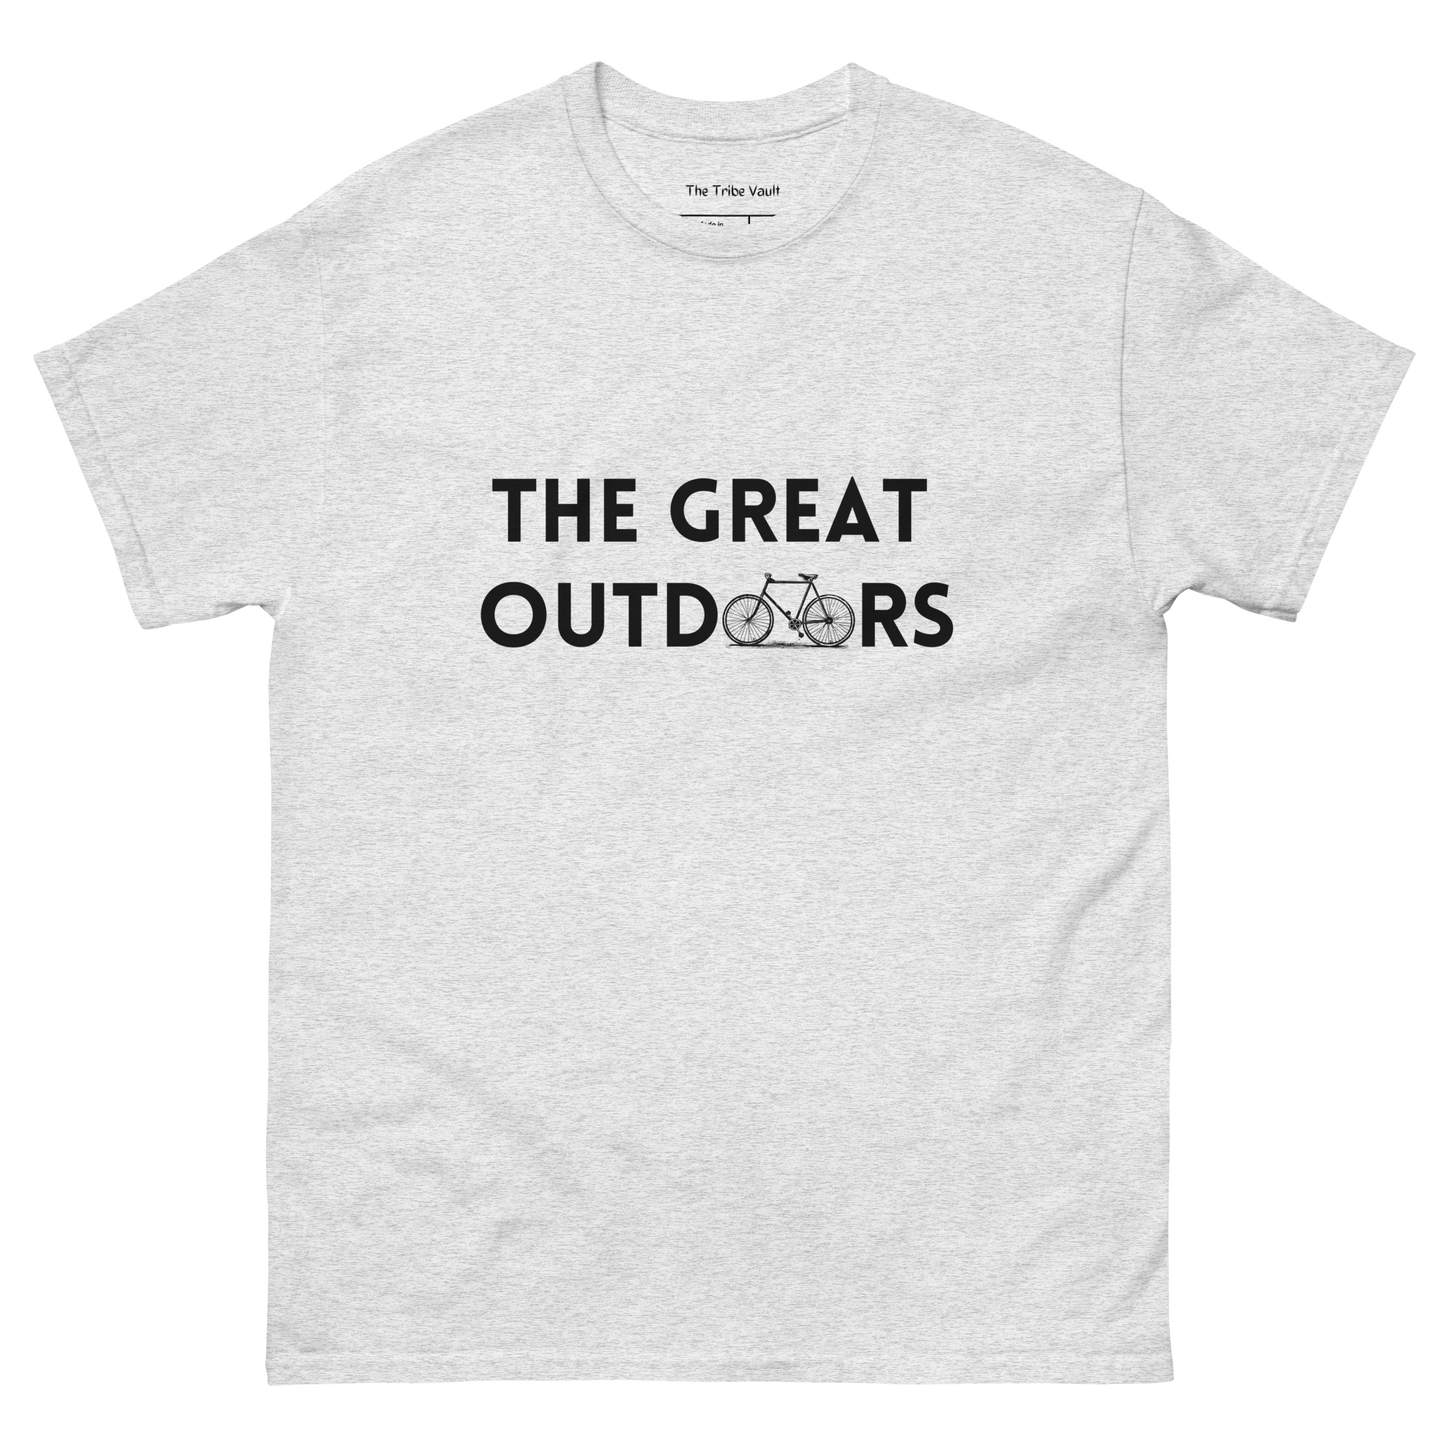 The Great Outdoors T-shirt